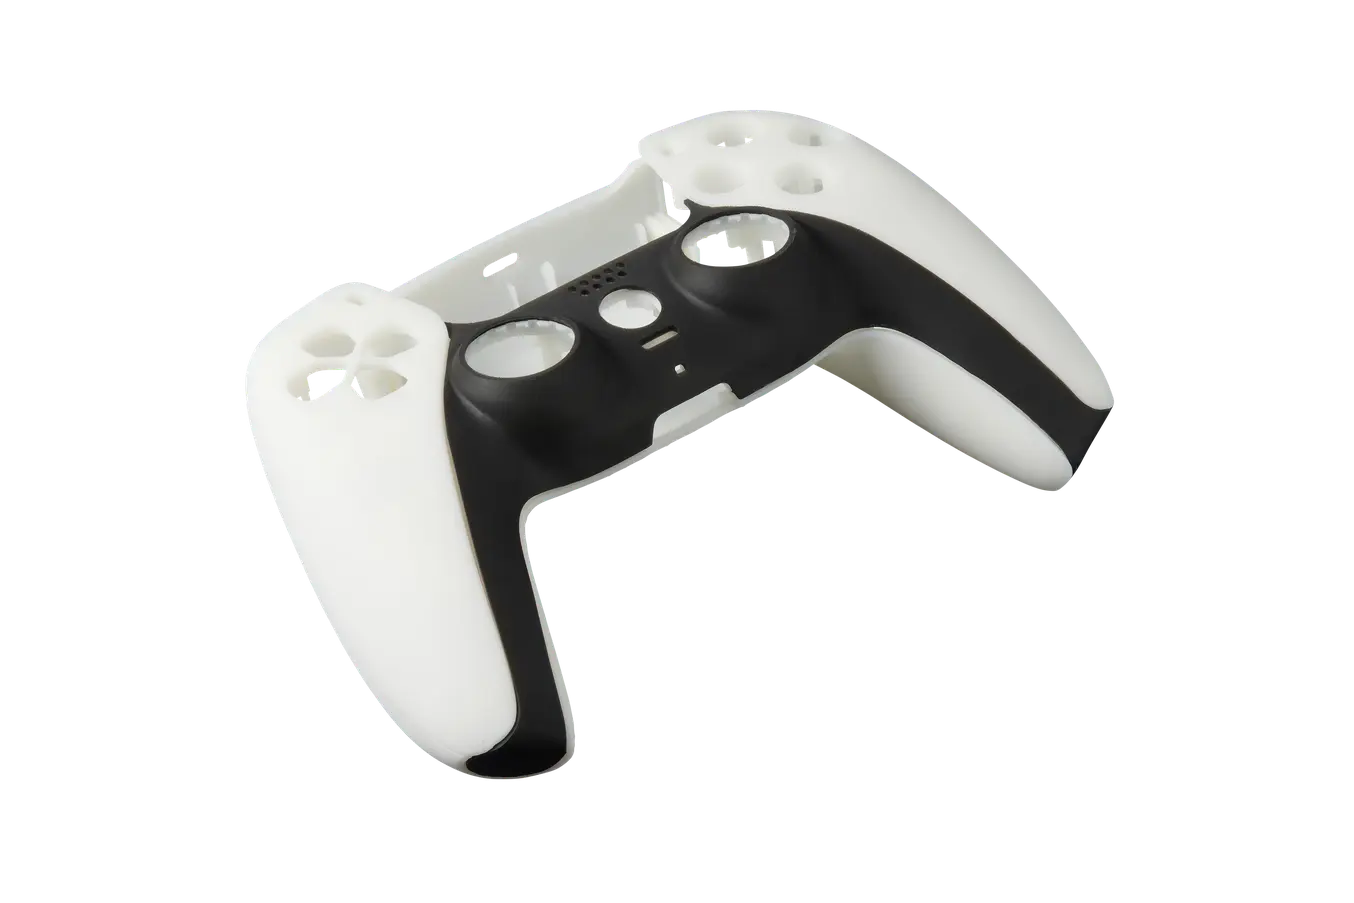 A three-piece gaming controller prototype assembly, 3D printed in two different materials for contrasting colors.